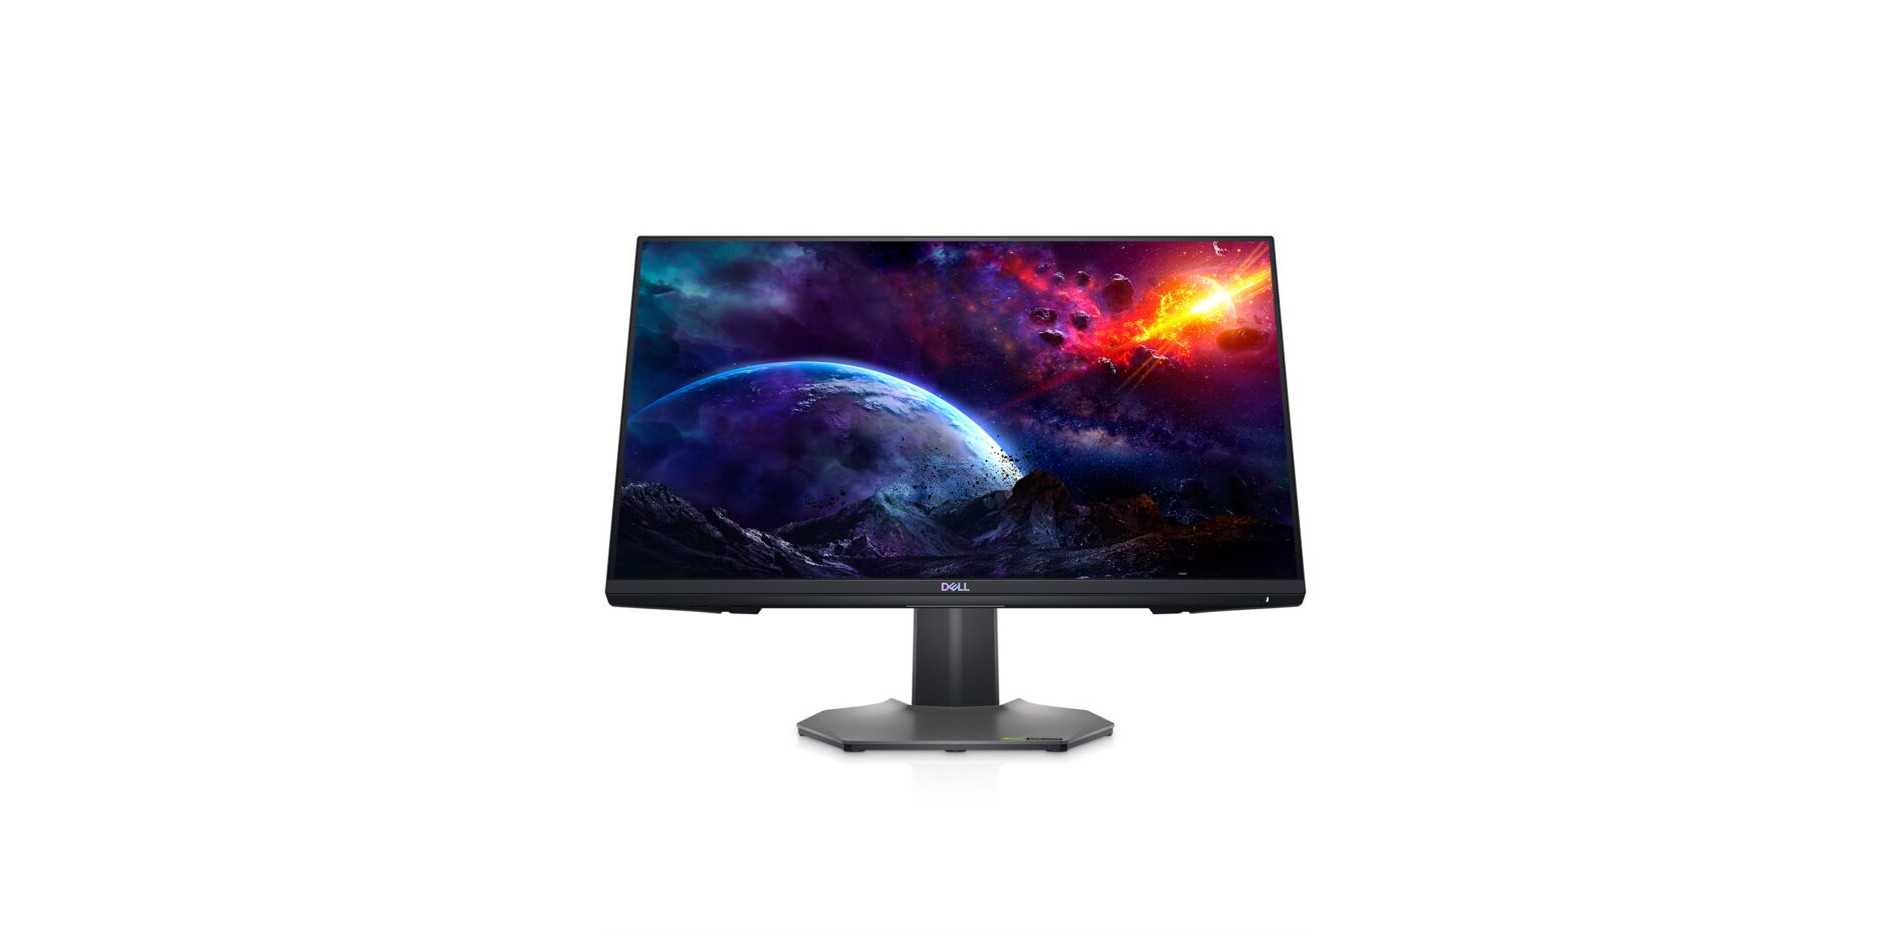 Four New Gaming Monitors by DELL with AMD FreeSync, S2522HG 